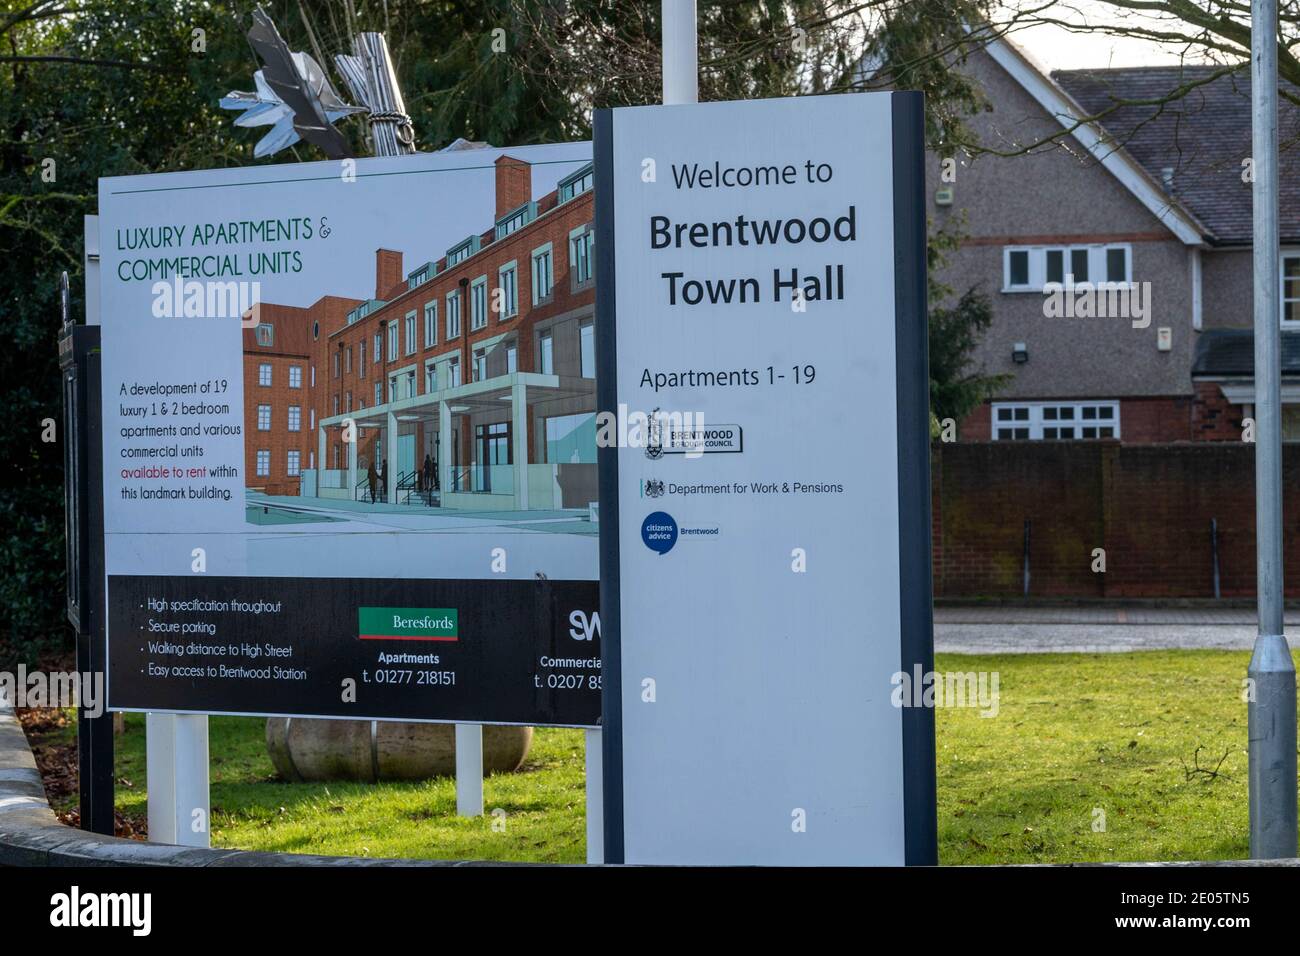 Brentwood Essex 30th December 2020 Brentwood, Essex has the higest covid-19 infection rate in England and Essex has declared a 'Critical incident' due to pressure on hospitals and NHS facilites. Credit: Ian Davidson/Alamy Live News Stock Photo